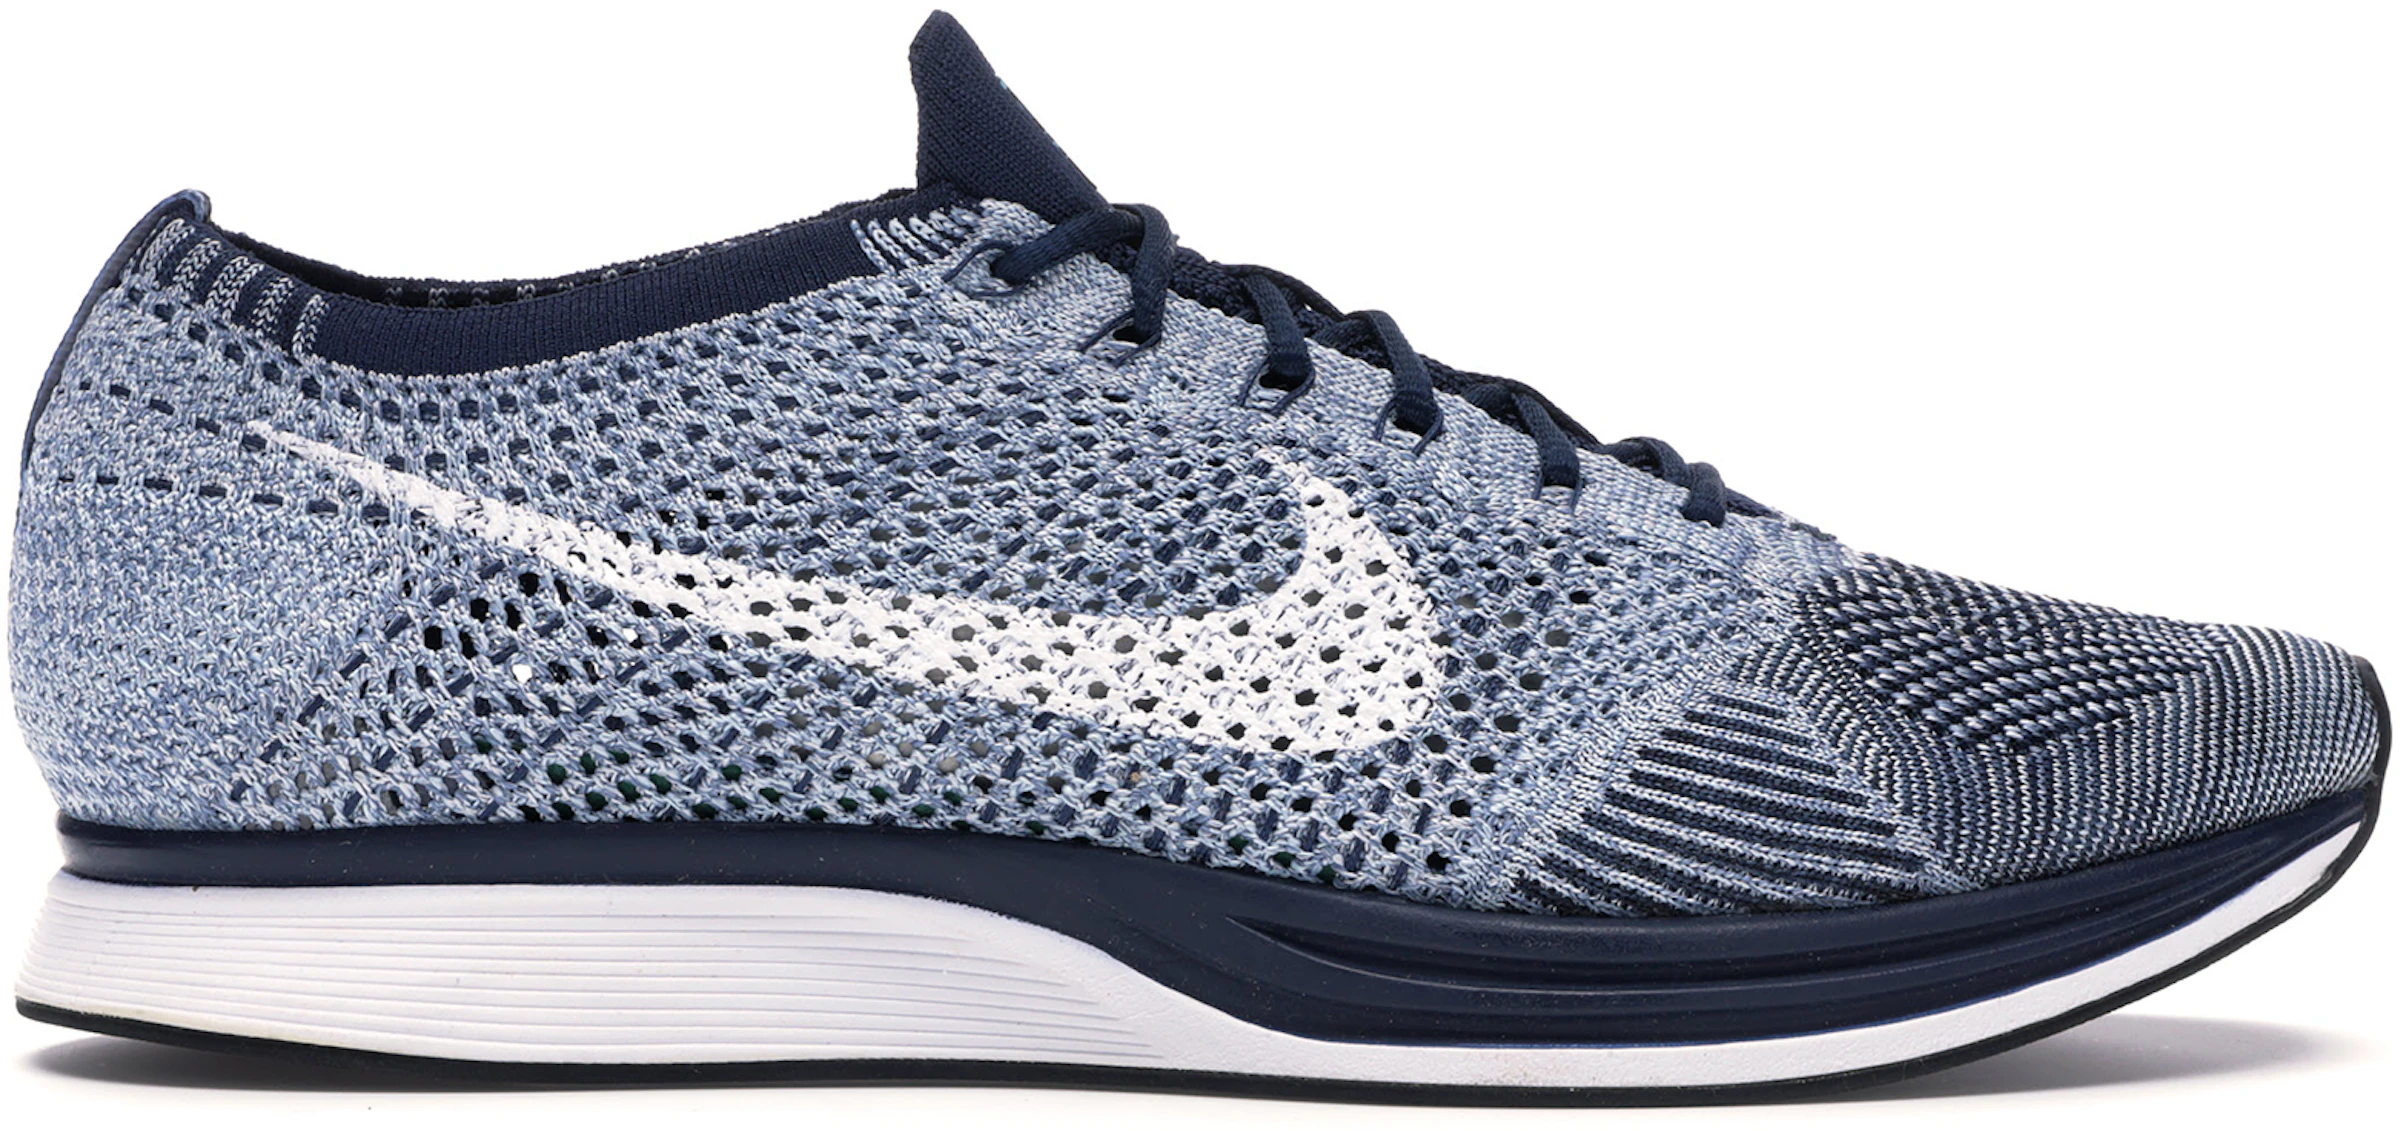 Todos zorro Solicitud Nike Flyknit Racer Blue Tint - 862713-401 - ES